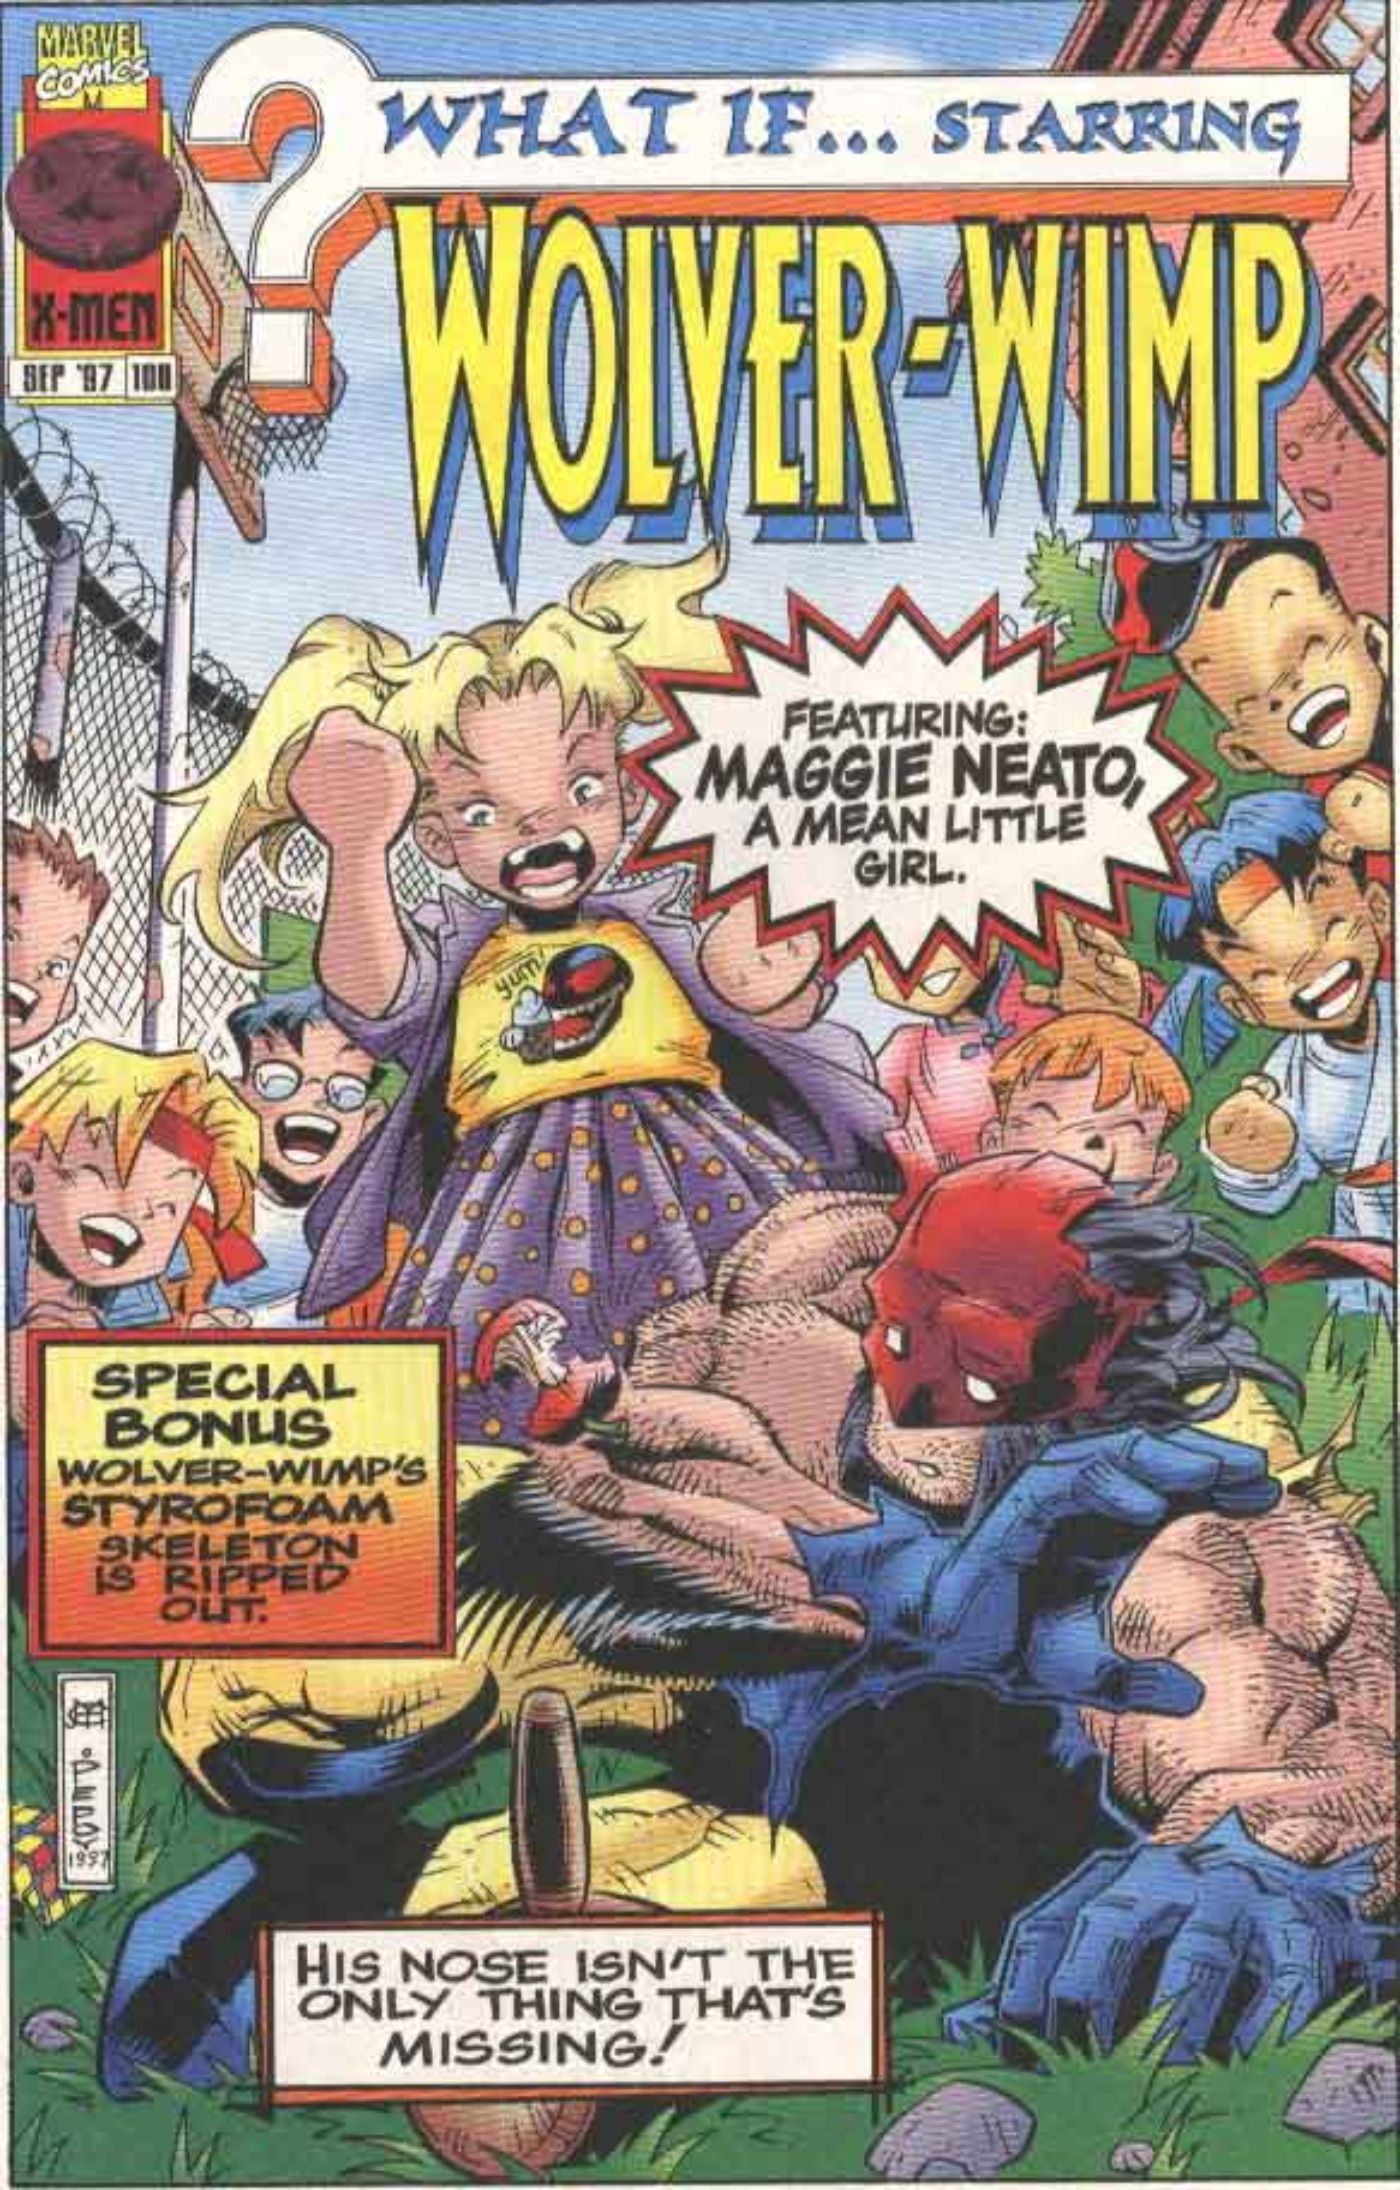 Wolver-Wimp comic book cover.